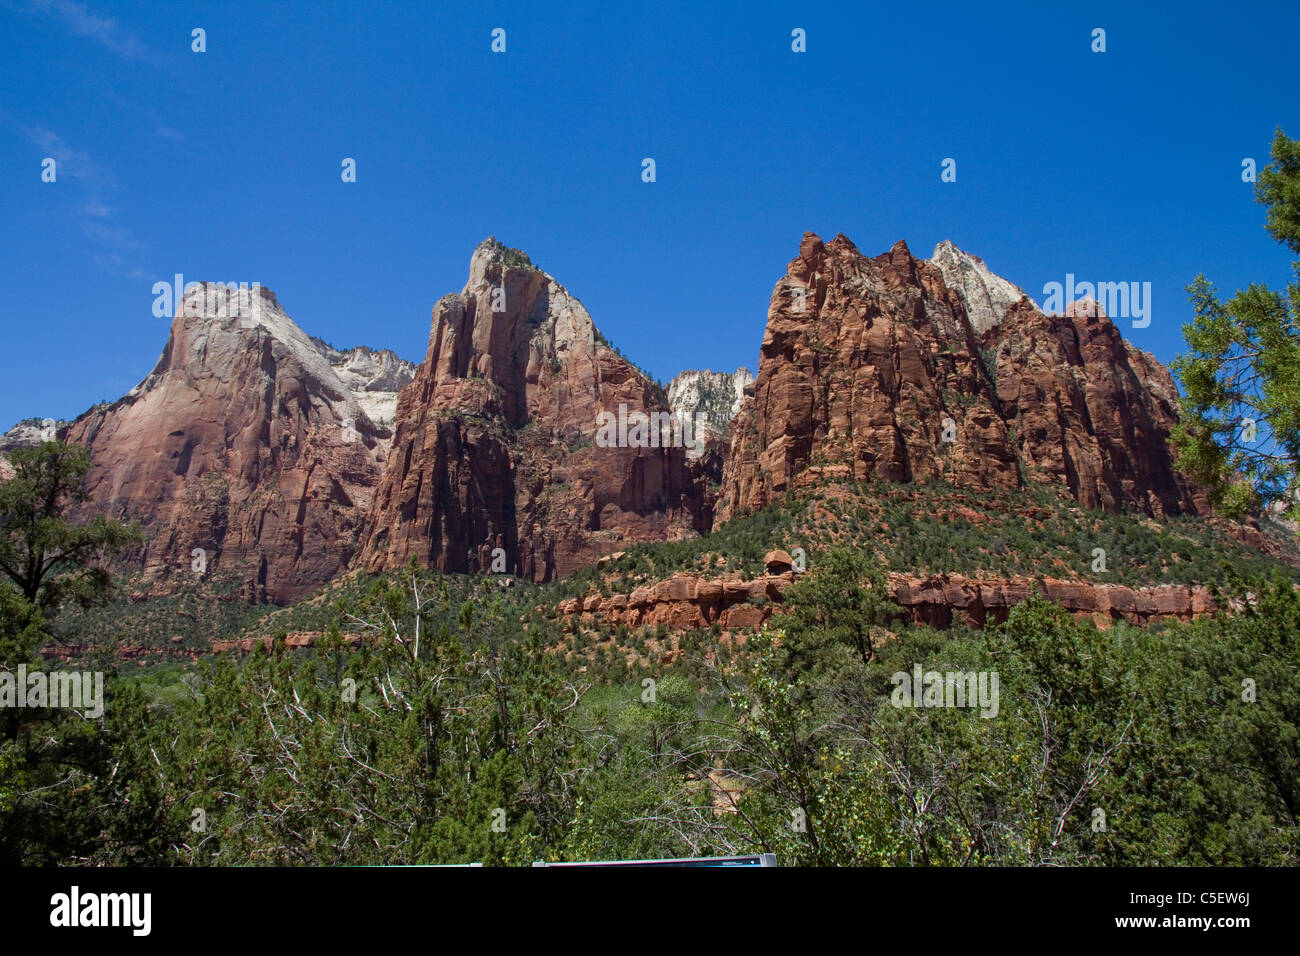 Abraham, Isaac and Jacob Peaks, Upper Zion Canyon, Zion National Park, UT Stock Photo